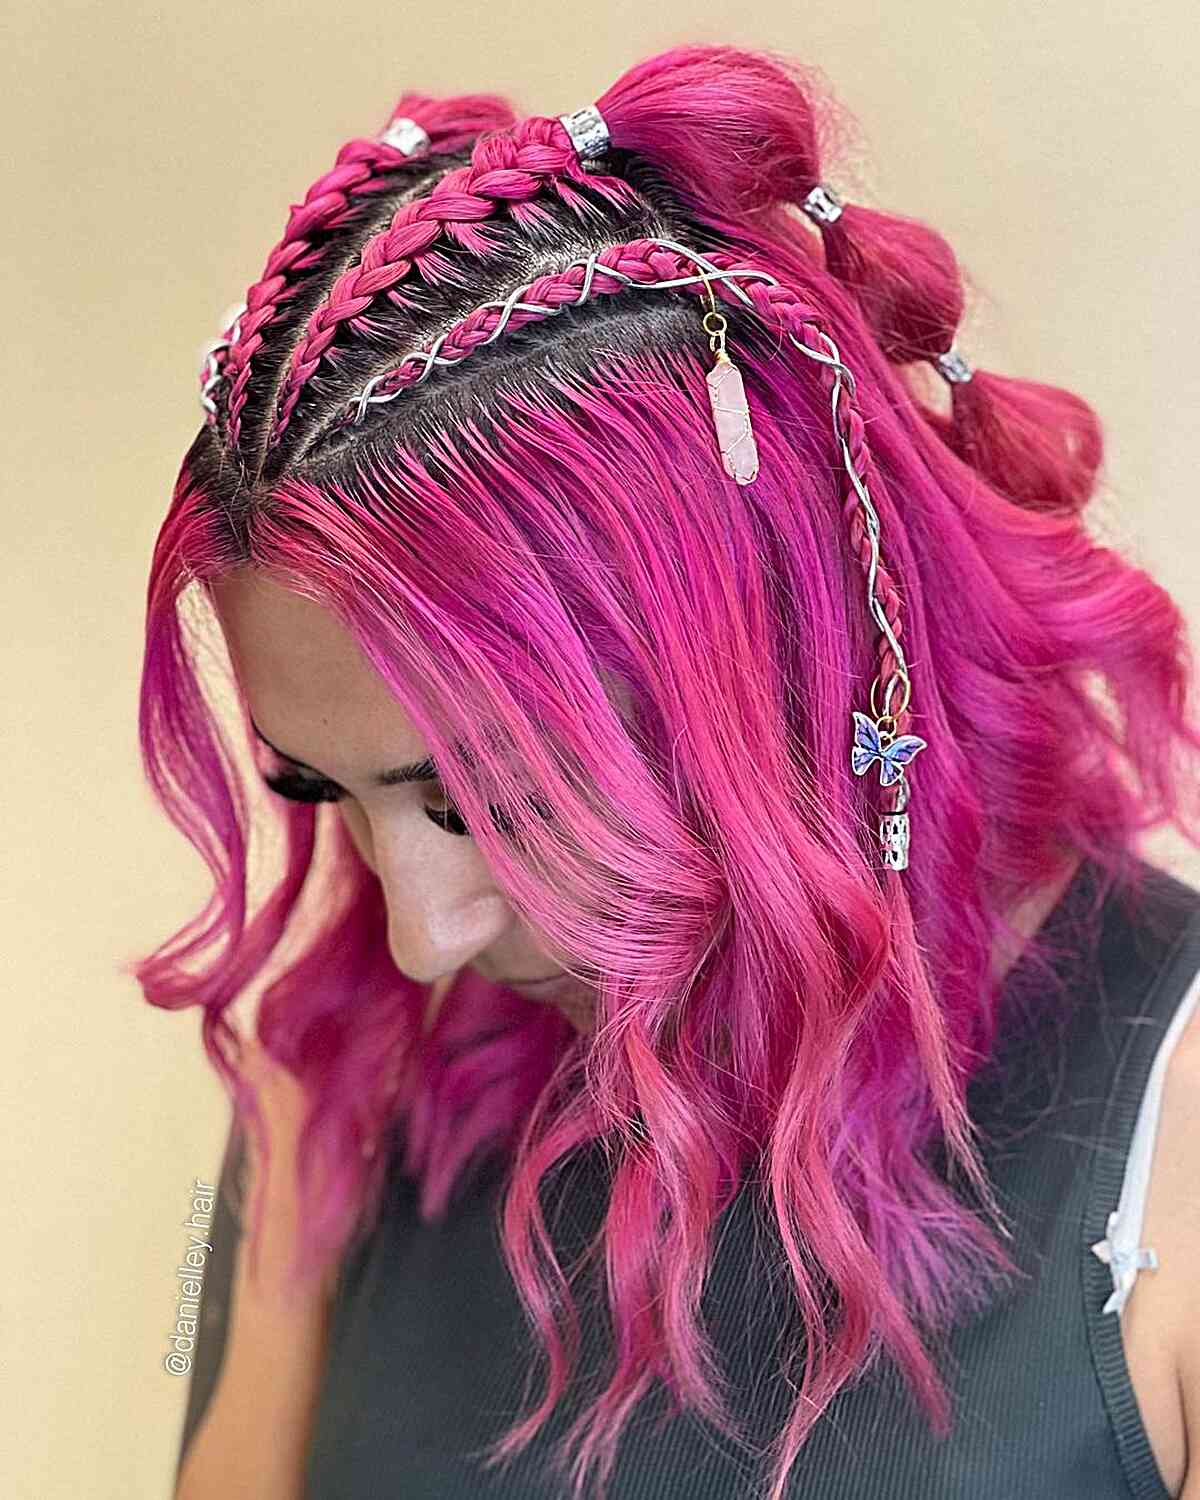 Medium-Length Hot Pink Hair with Braids and Accessories for Festivals